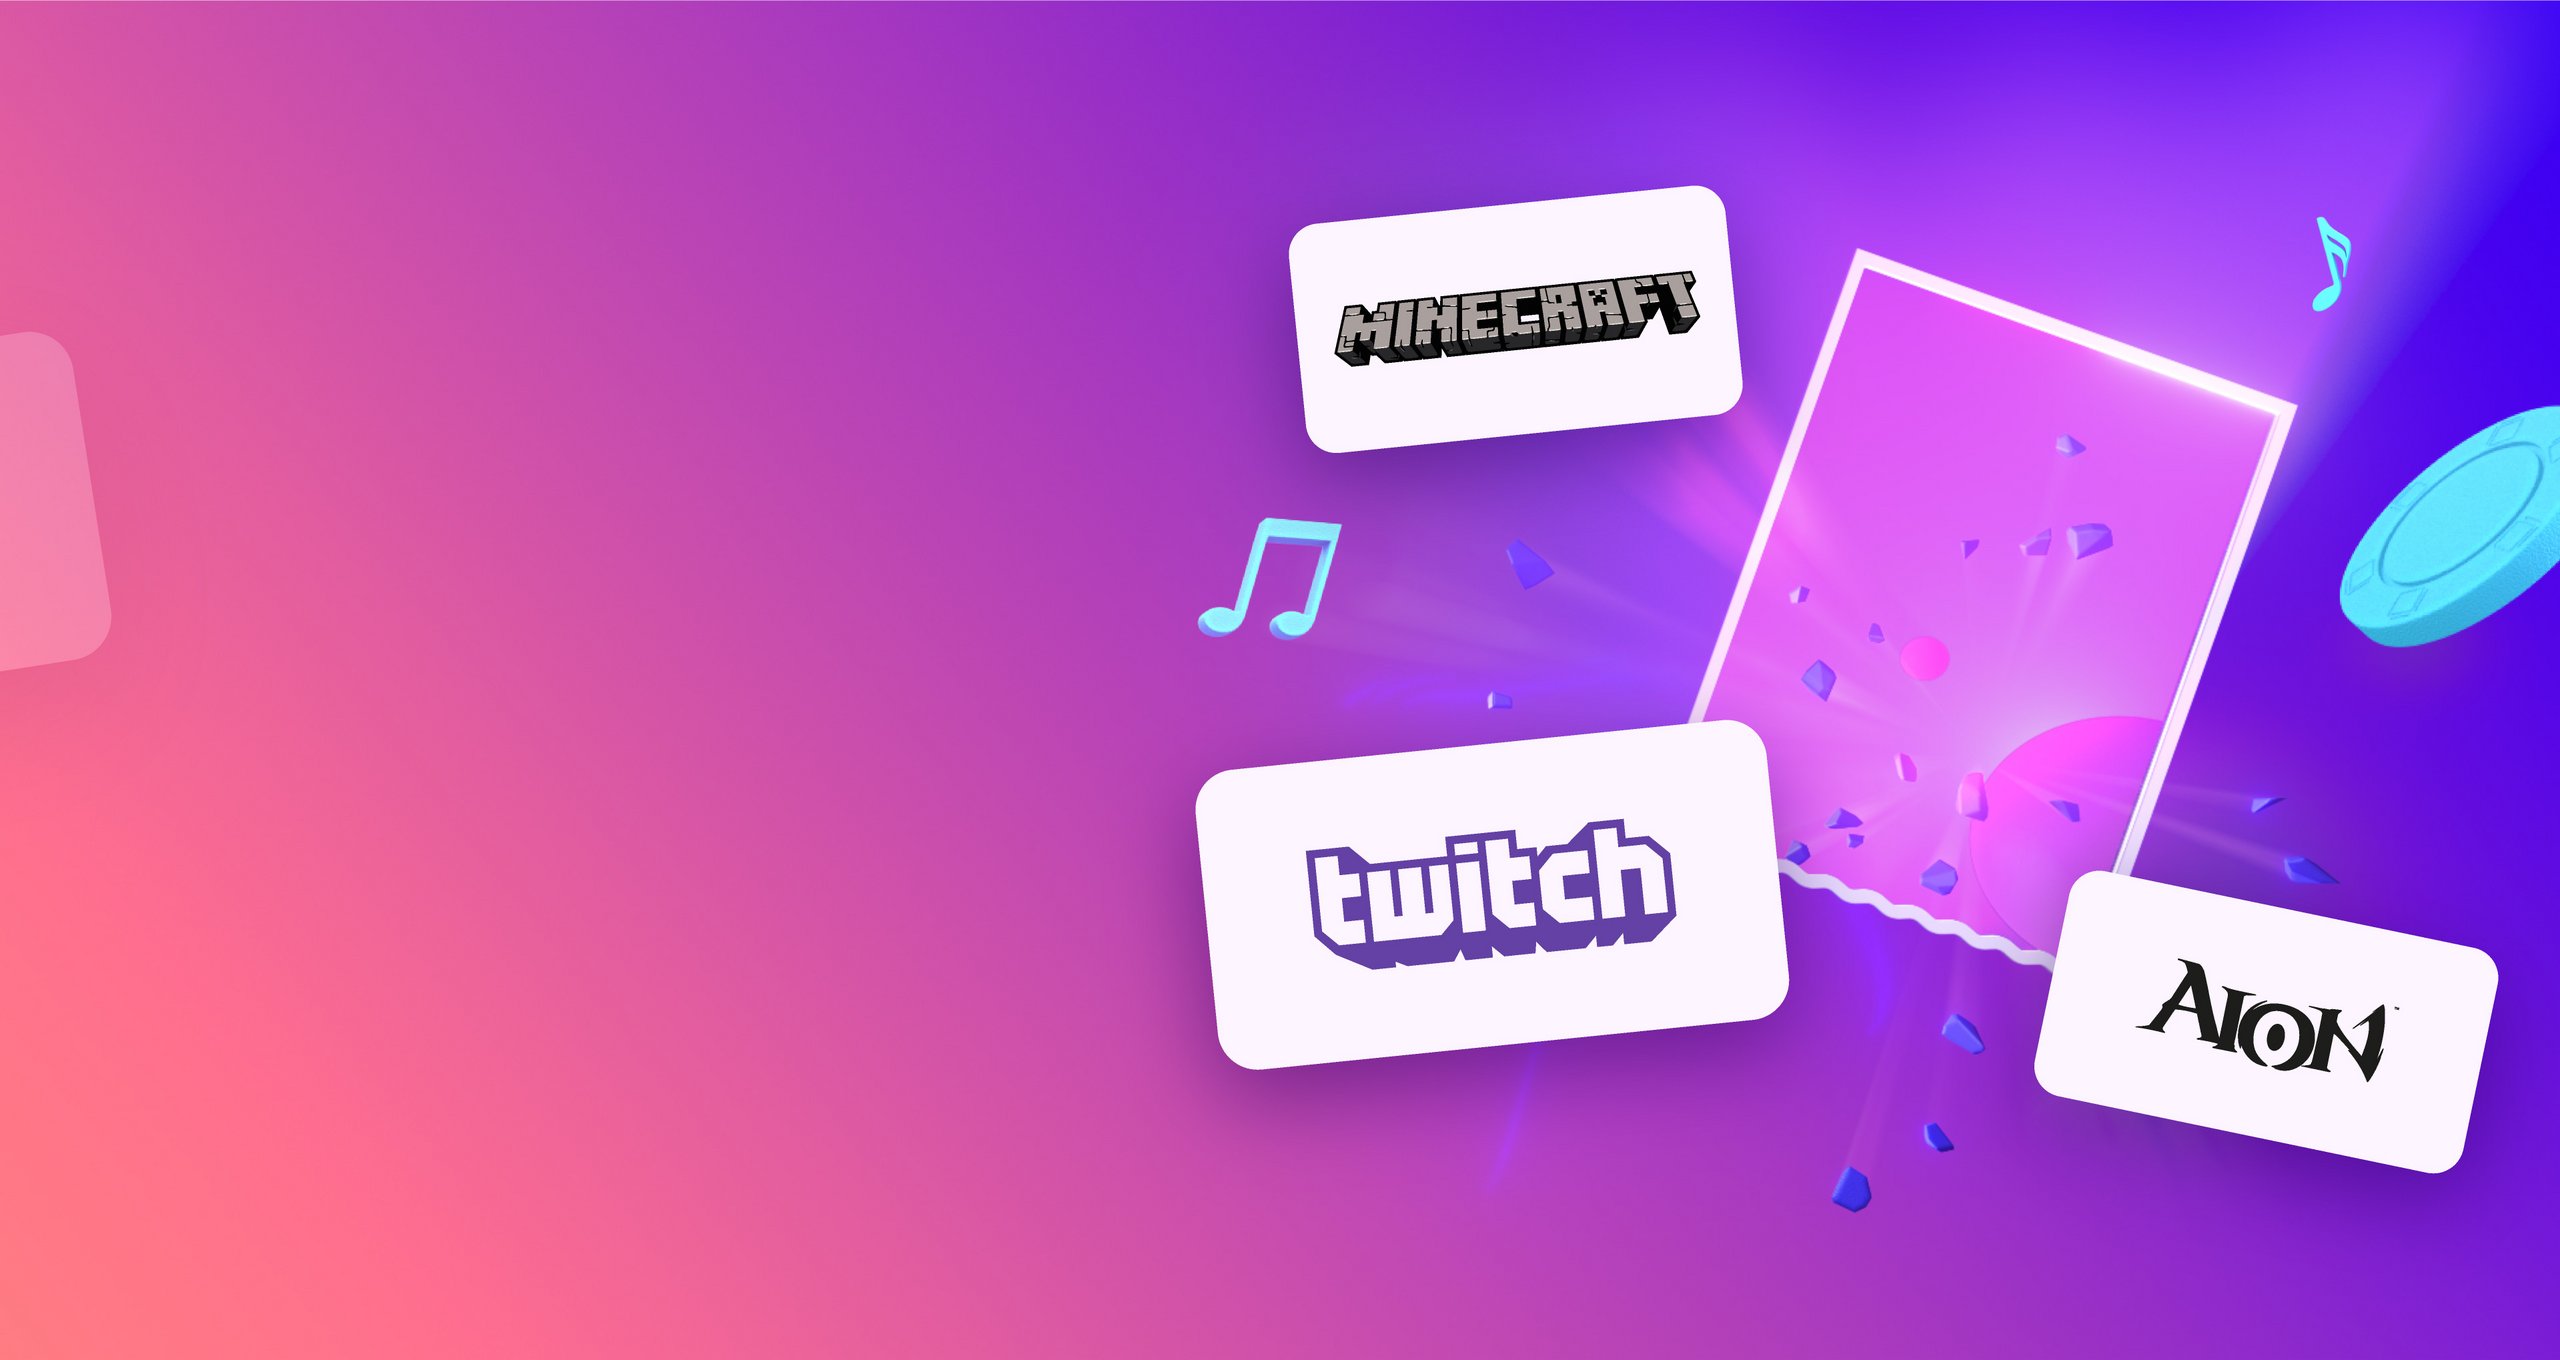 Minecraft, Twitch and AION logos on the purple background